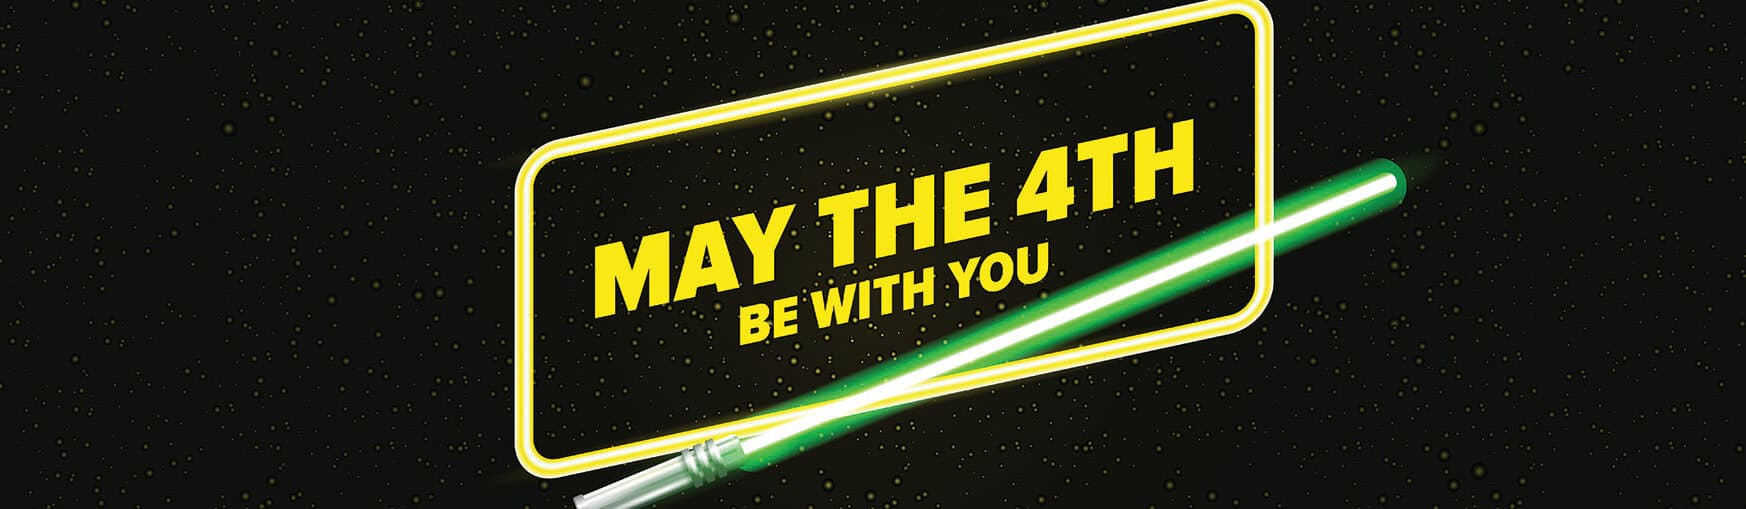 May the 4th be with you_ Adam Owen